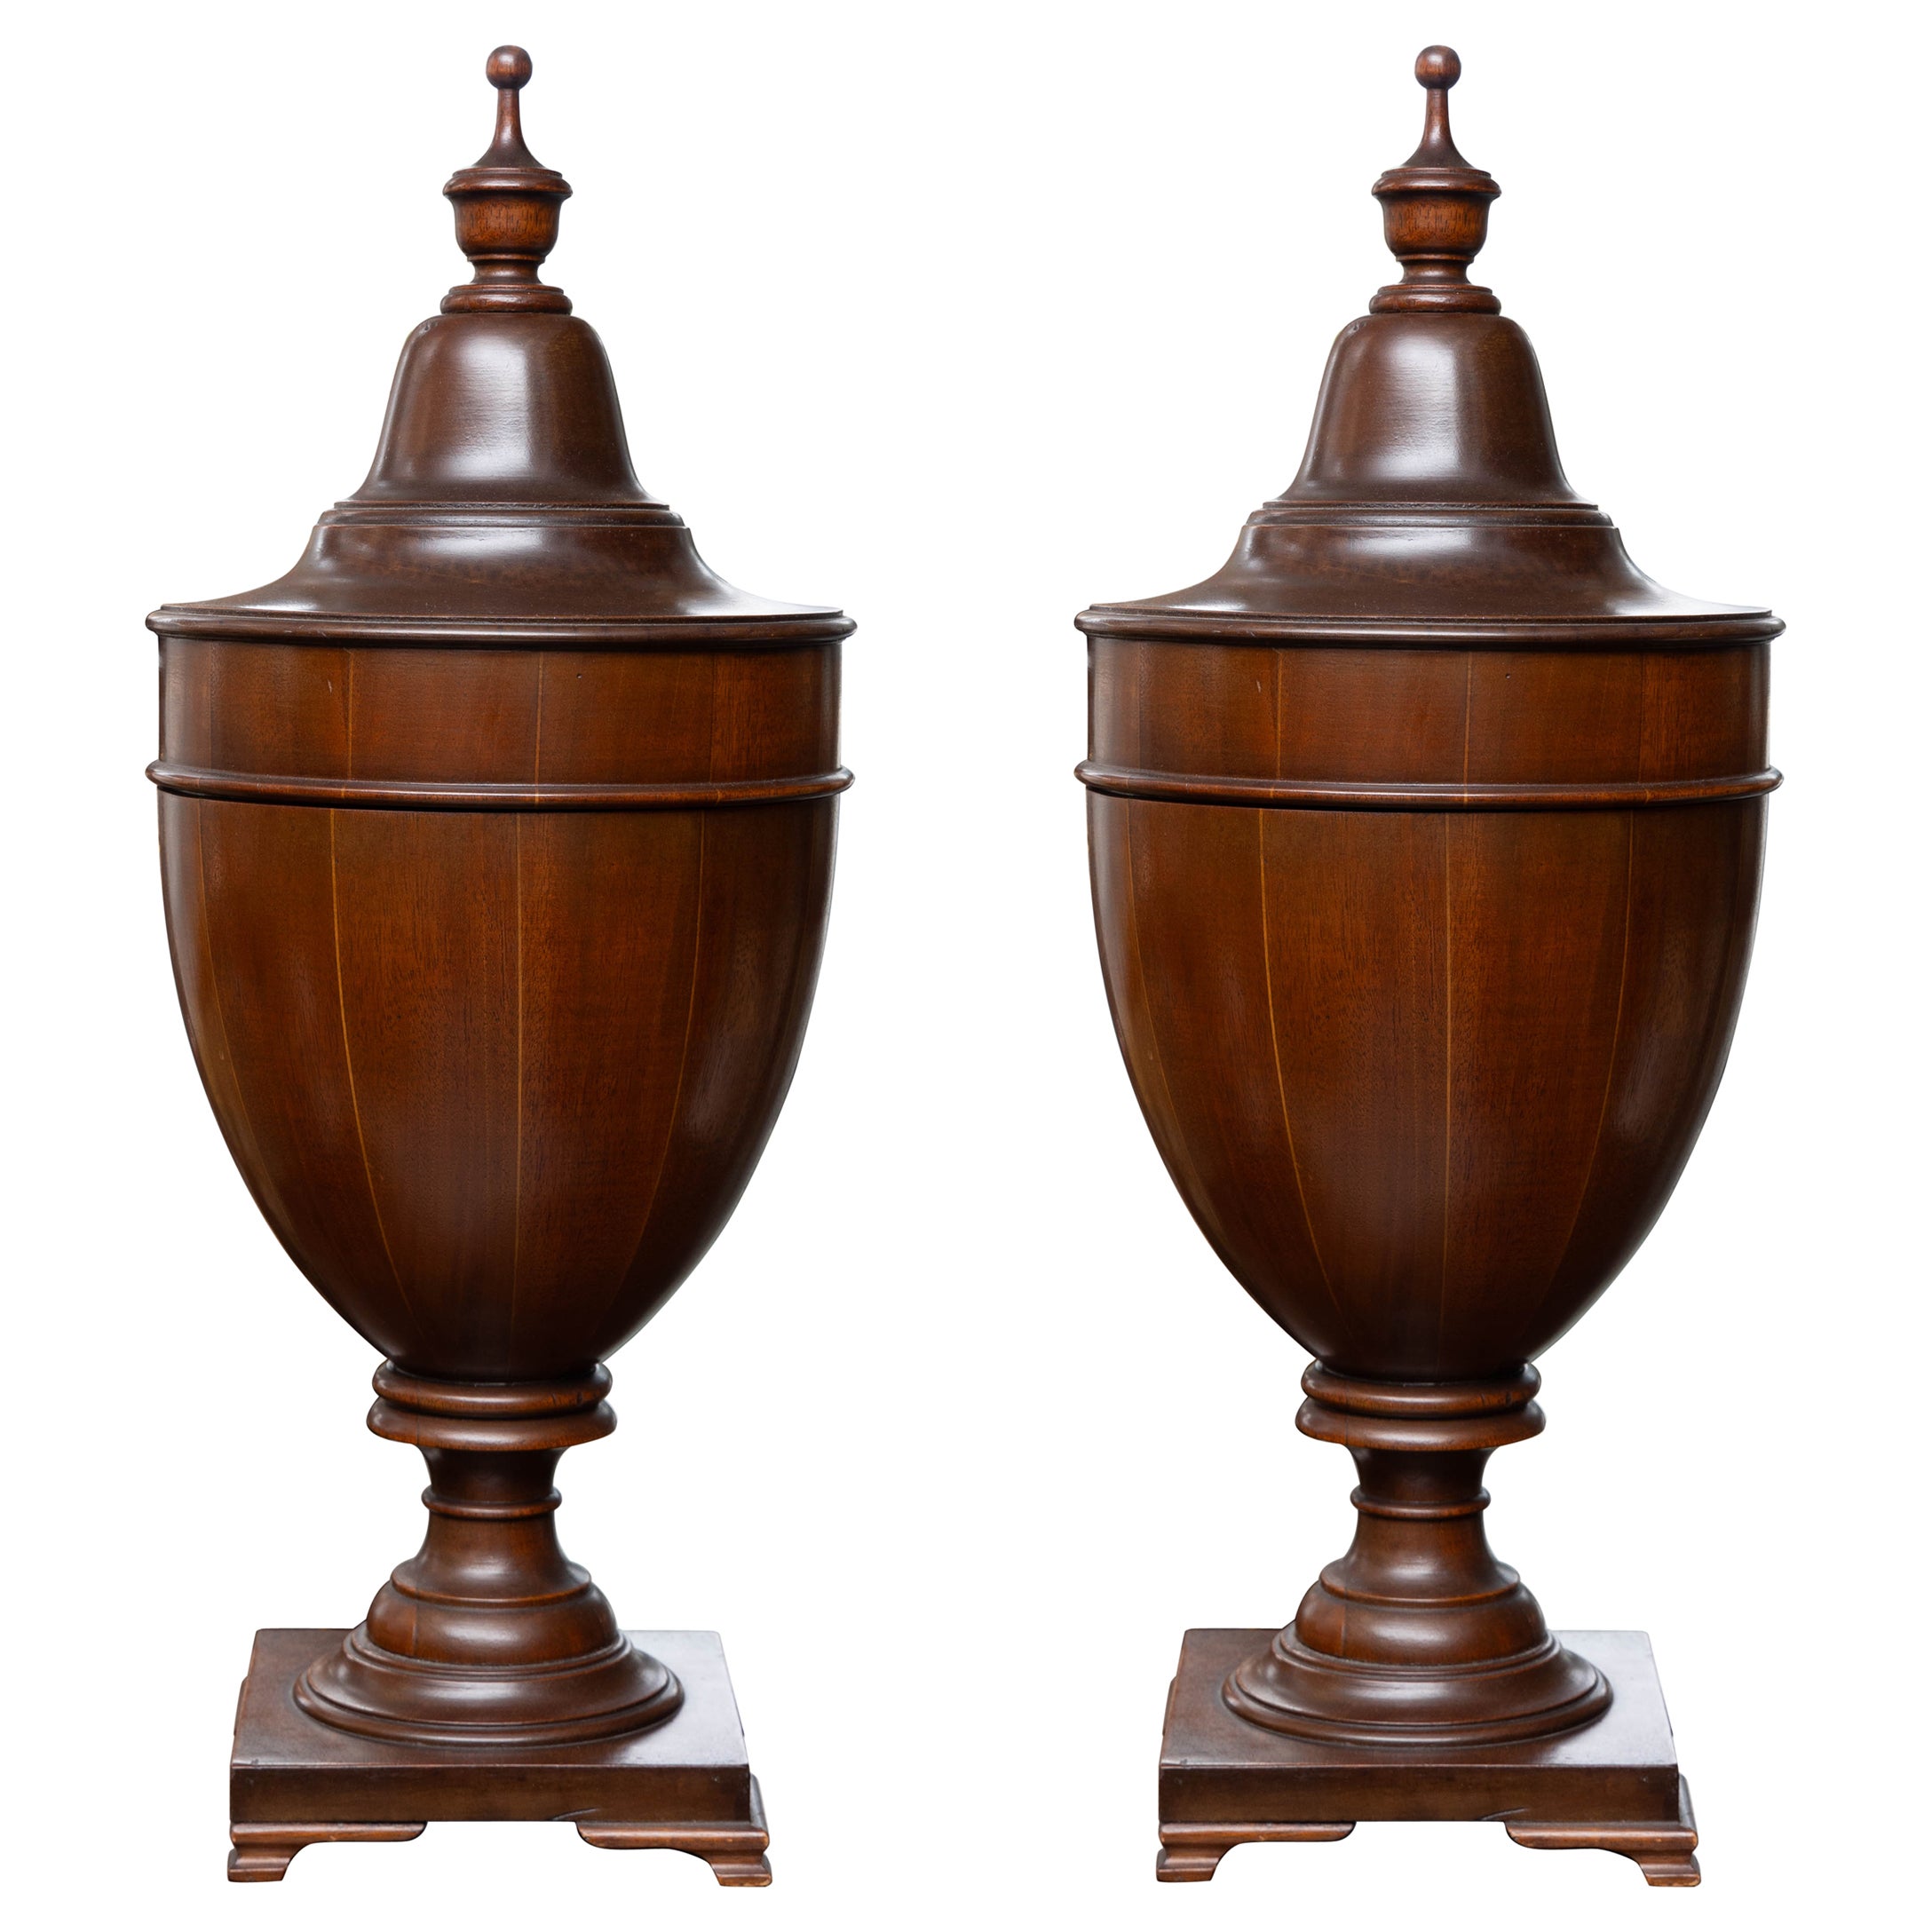 Mahogany George III Style Cutlery Urns - Pair available, priced individually.